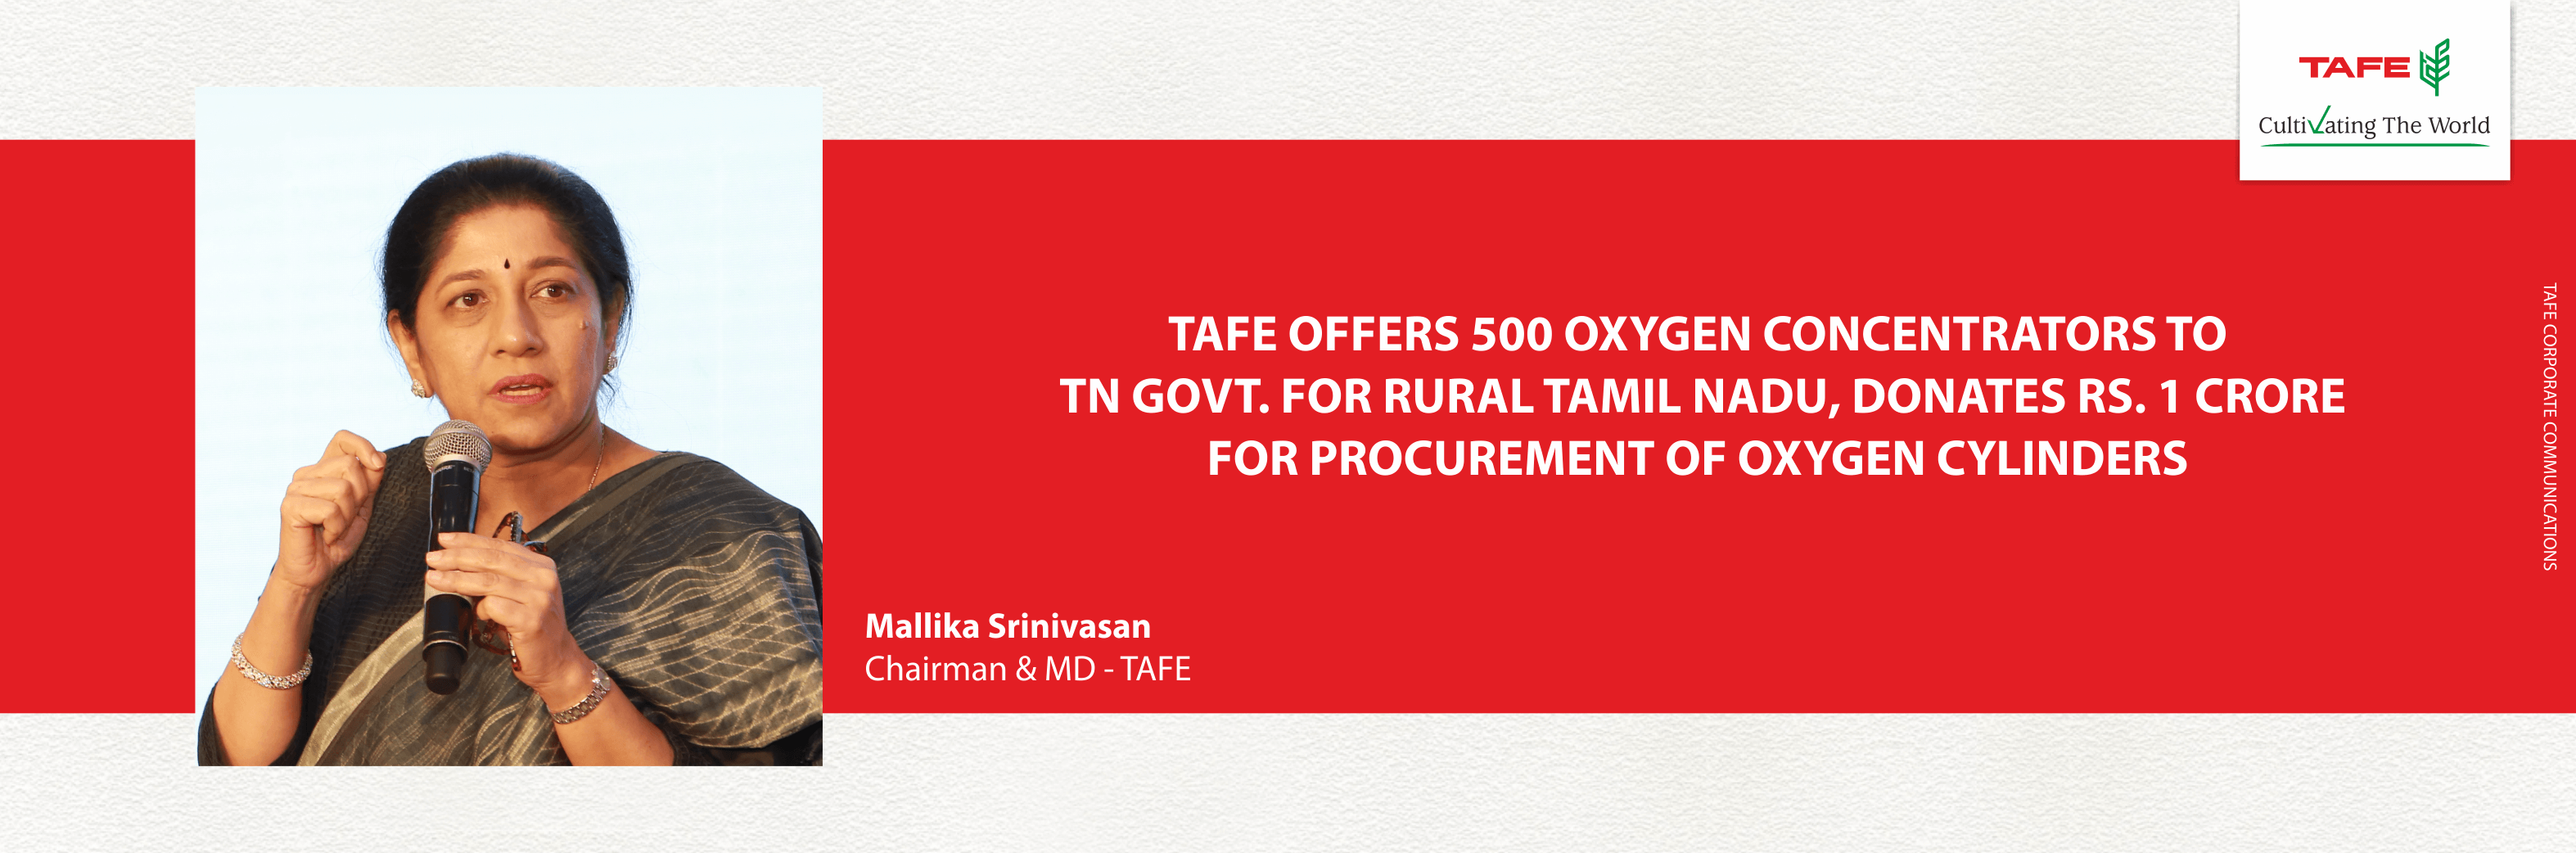 TAFE | Media Release | TAFE Offers 500 Oxygen Concentrators to TN Govt. for Rural Tamil Nadu. Donates Rs. 1 Crore for Procurement of Oxygen Cylinders.
